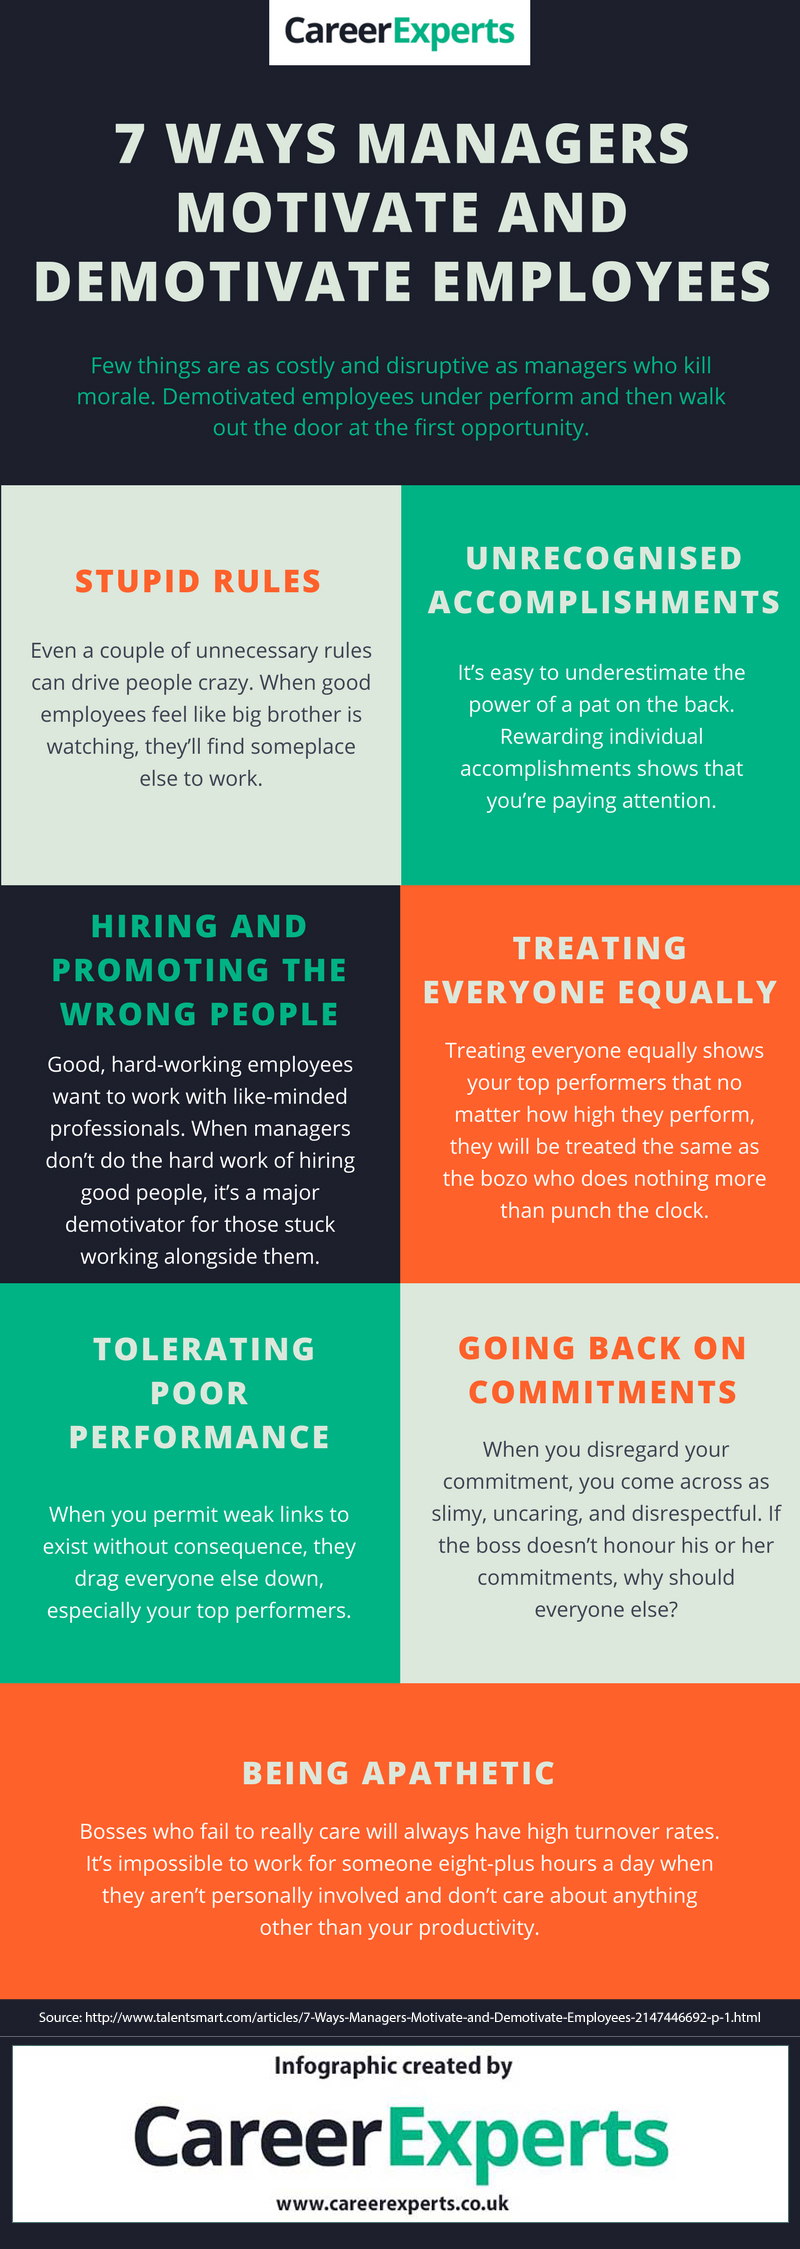 7 ways managers motivate and demotivate employees